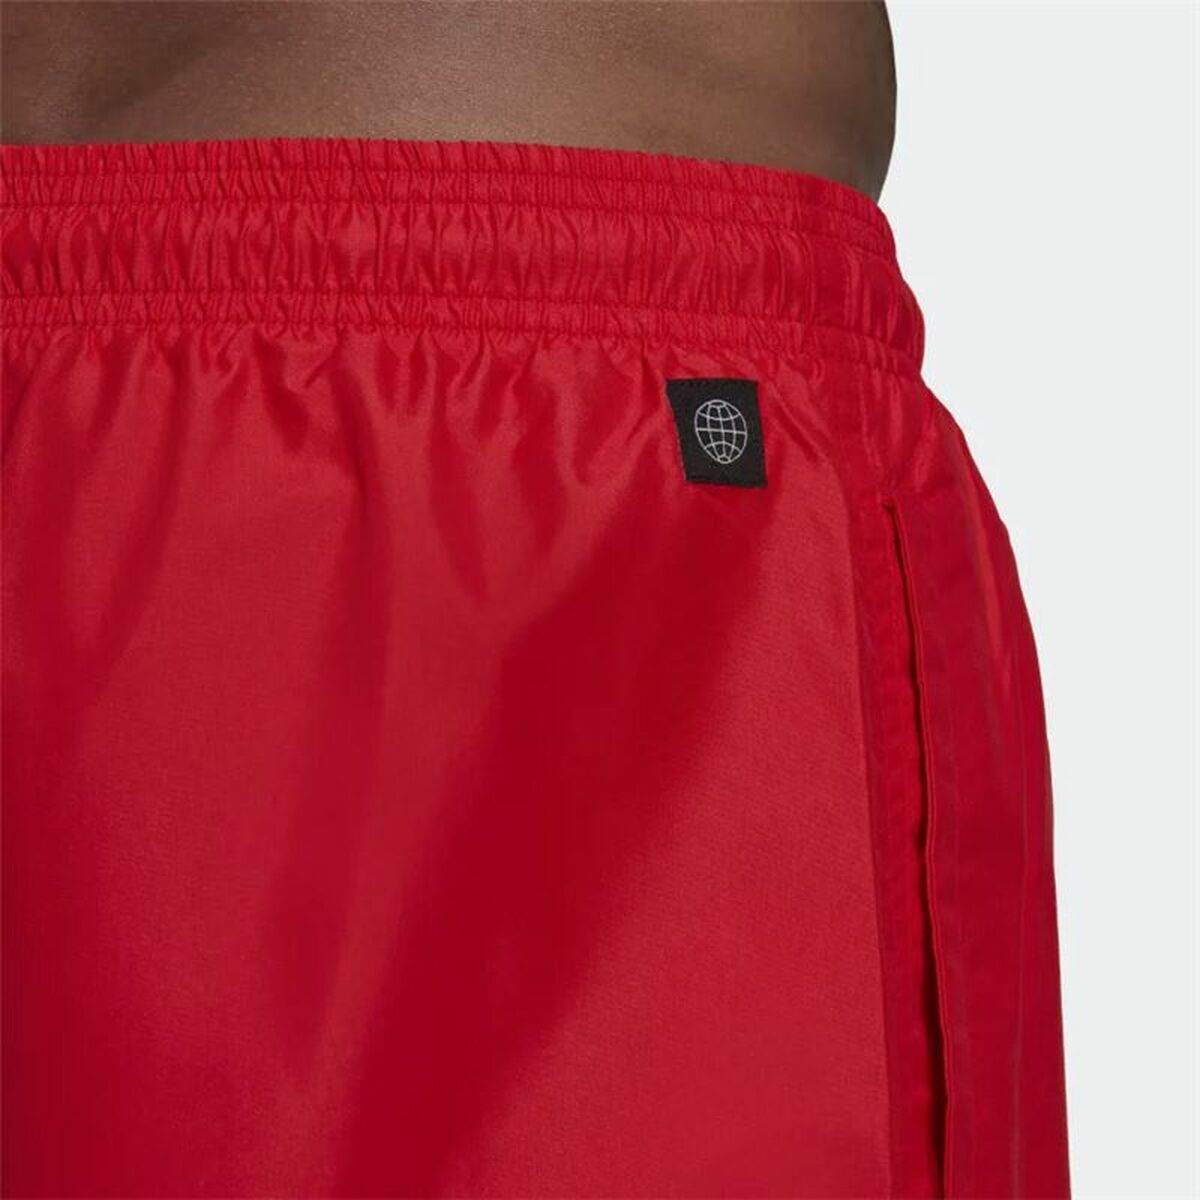 Men’s Bathing Costume Adidas Solid Red